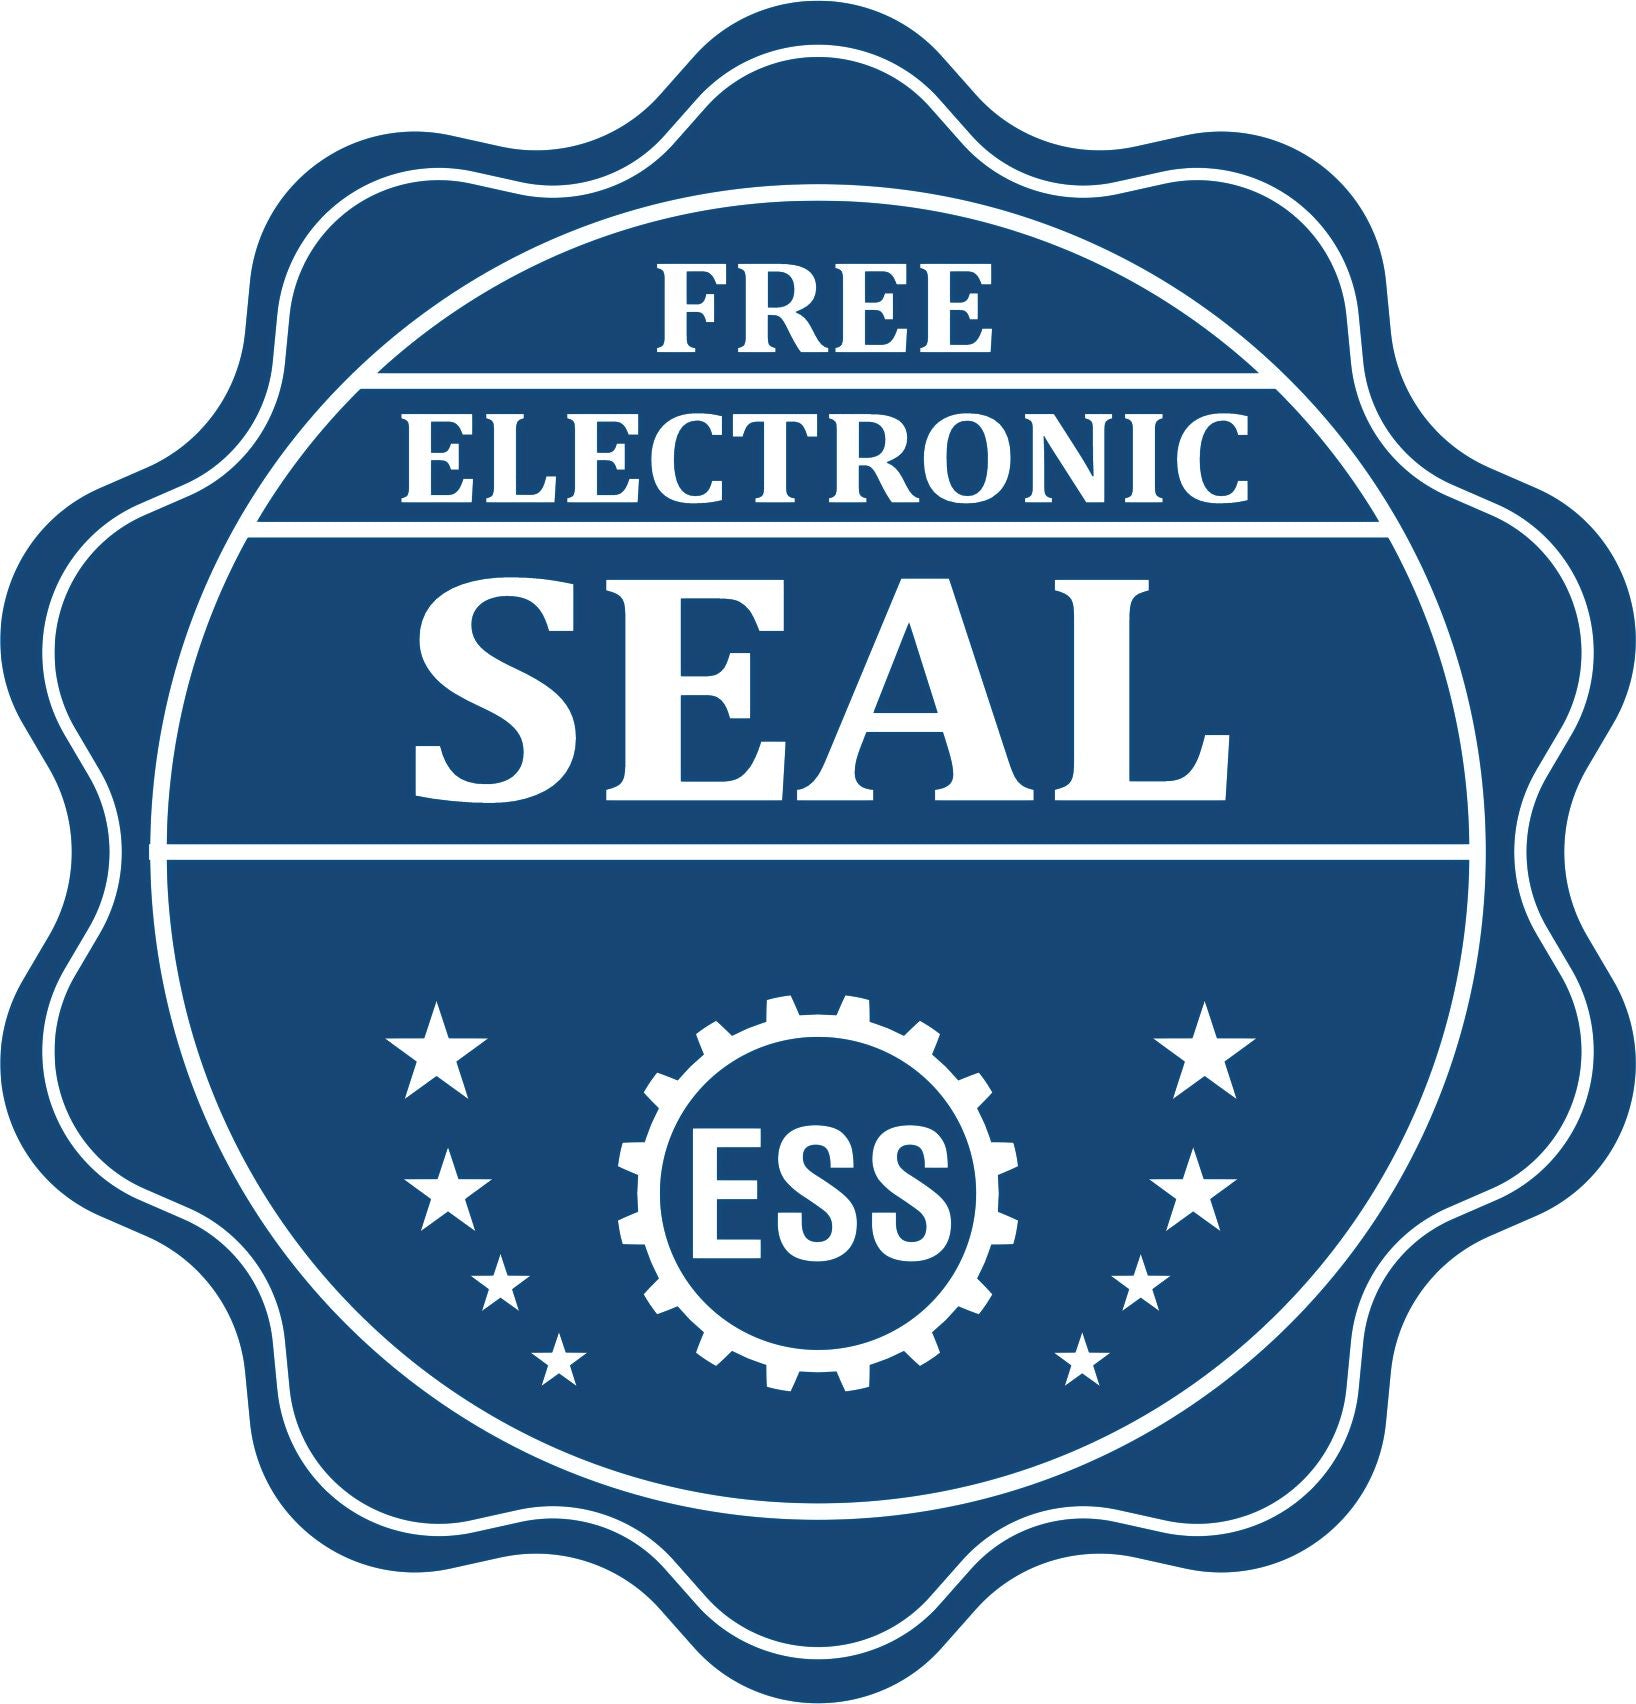 A badge showing a free electronic seal for the Washington Engineer Desk Seal with stars and the ESS gear on the emblem.